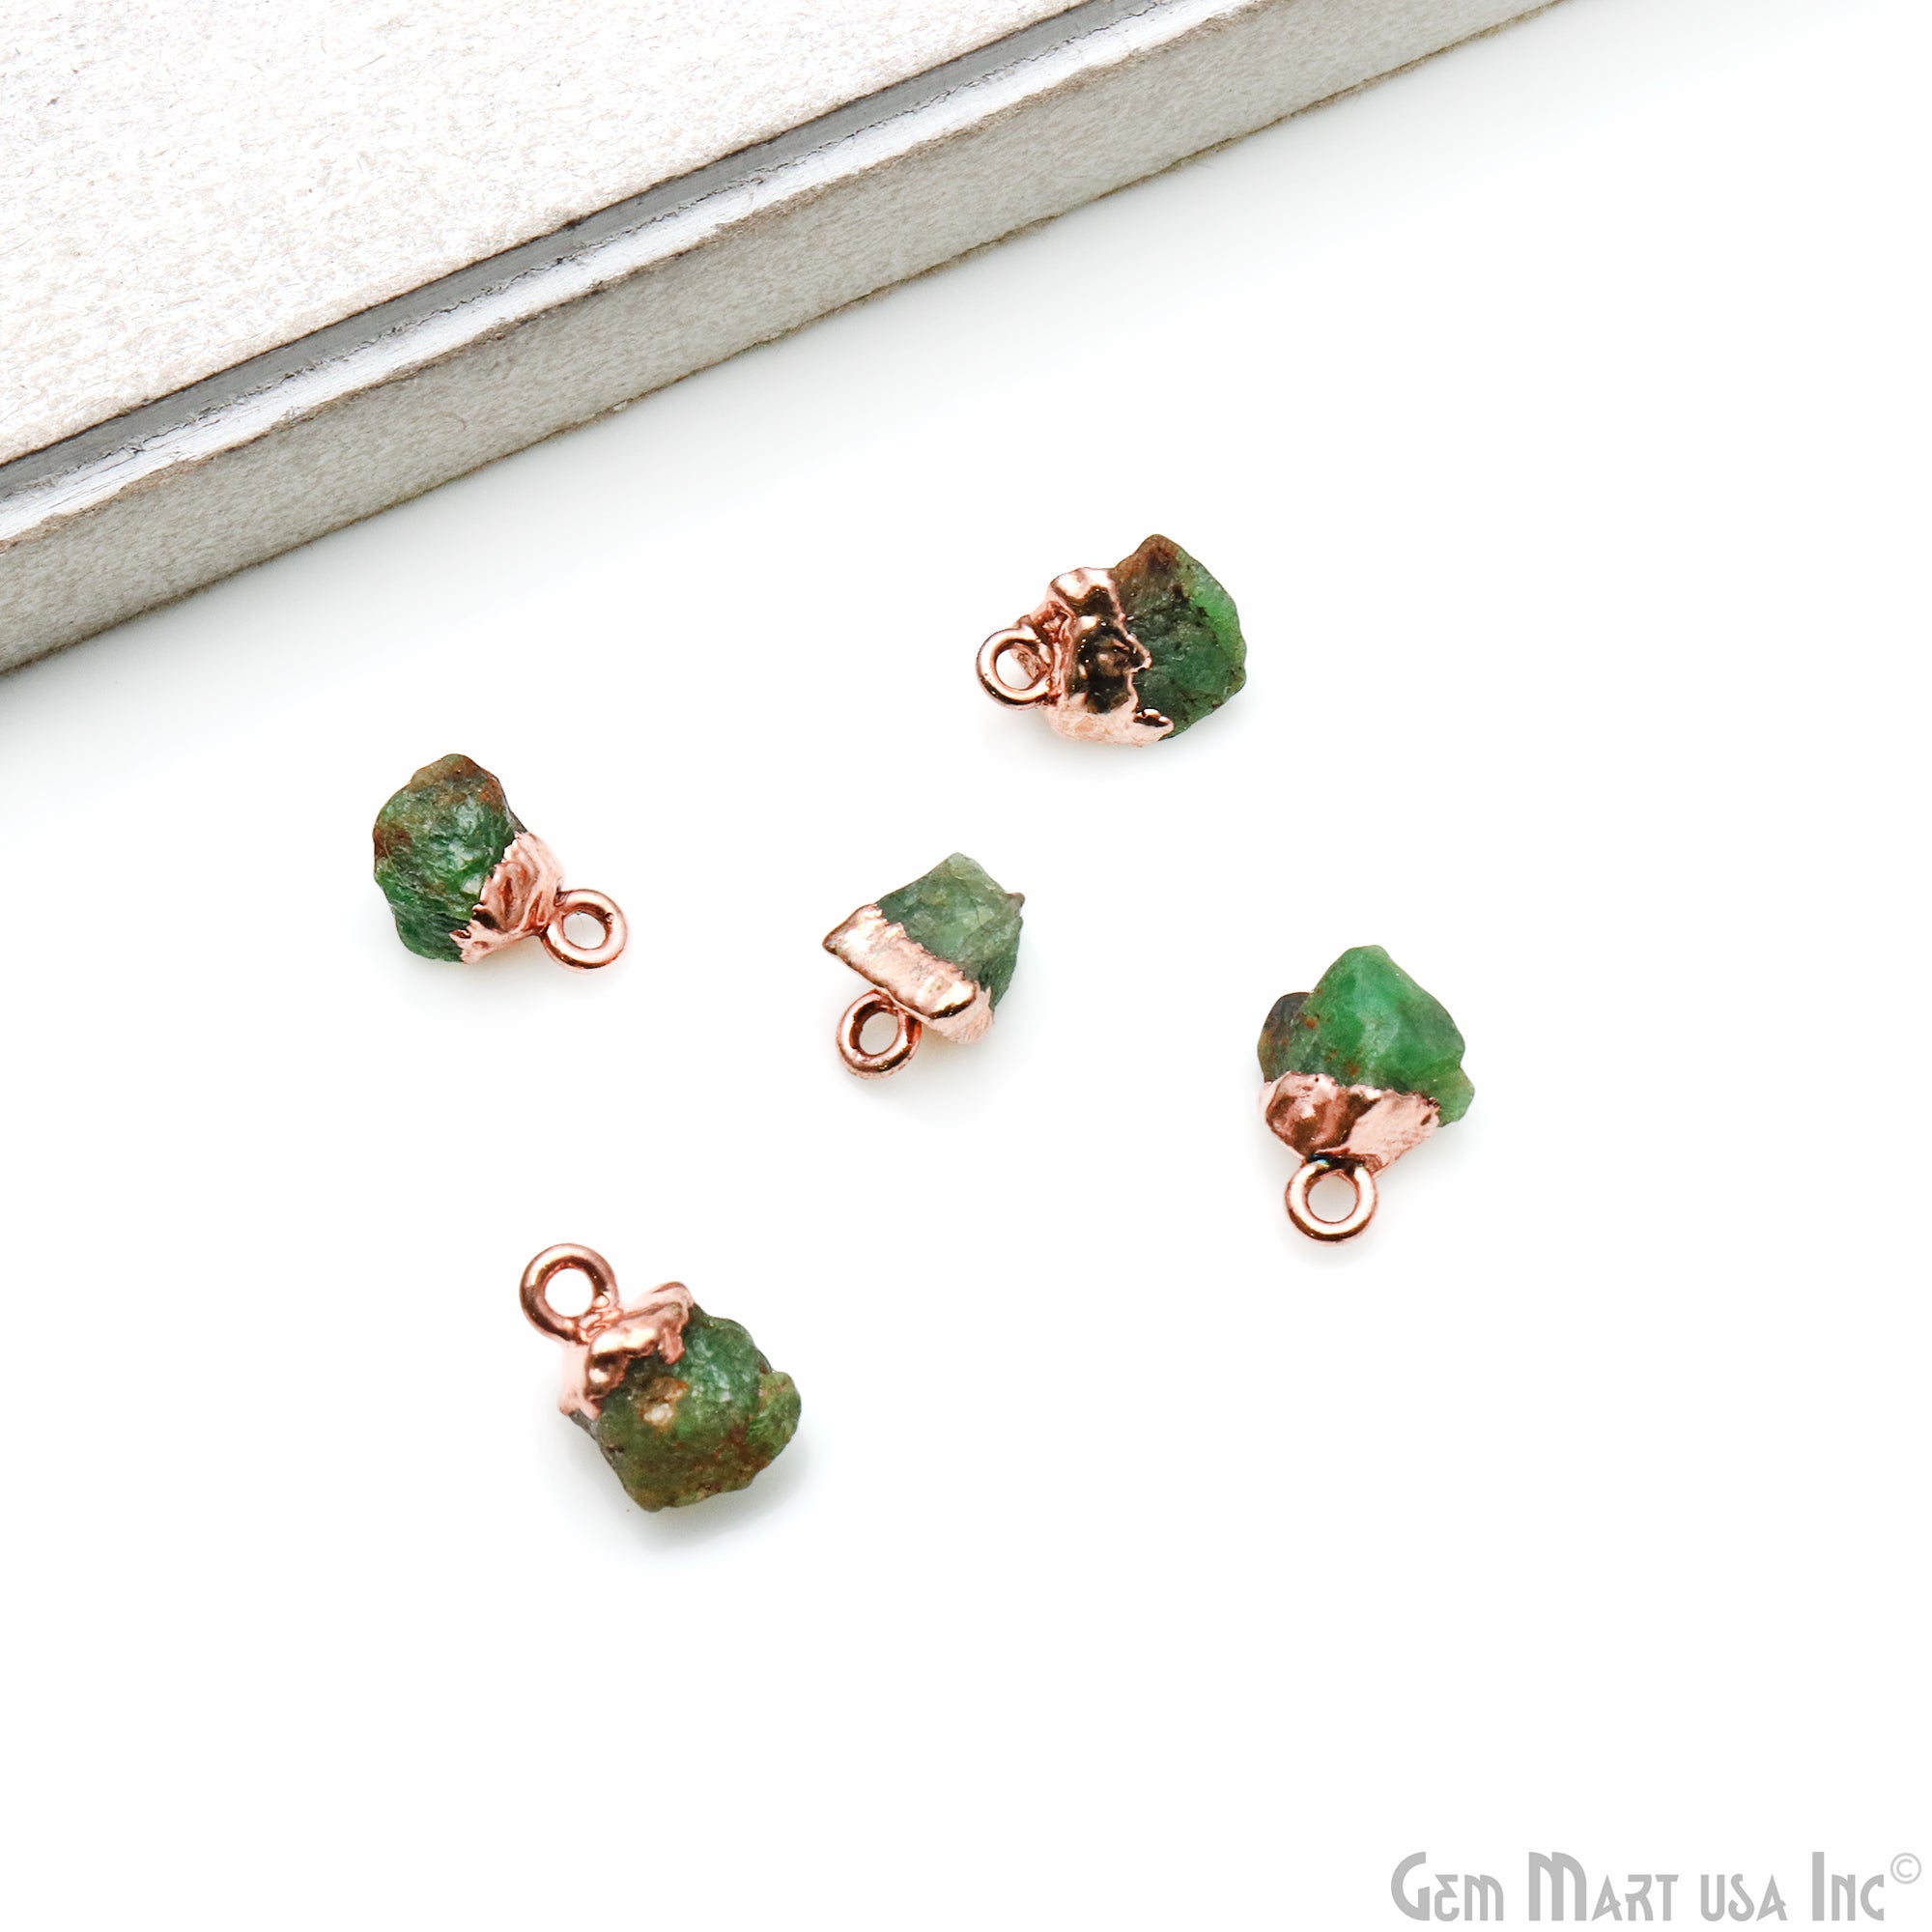 Chrome Diopside Gemstone 20x11mm Organic Rose Gold Edged Connector